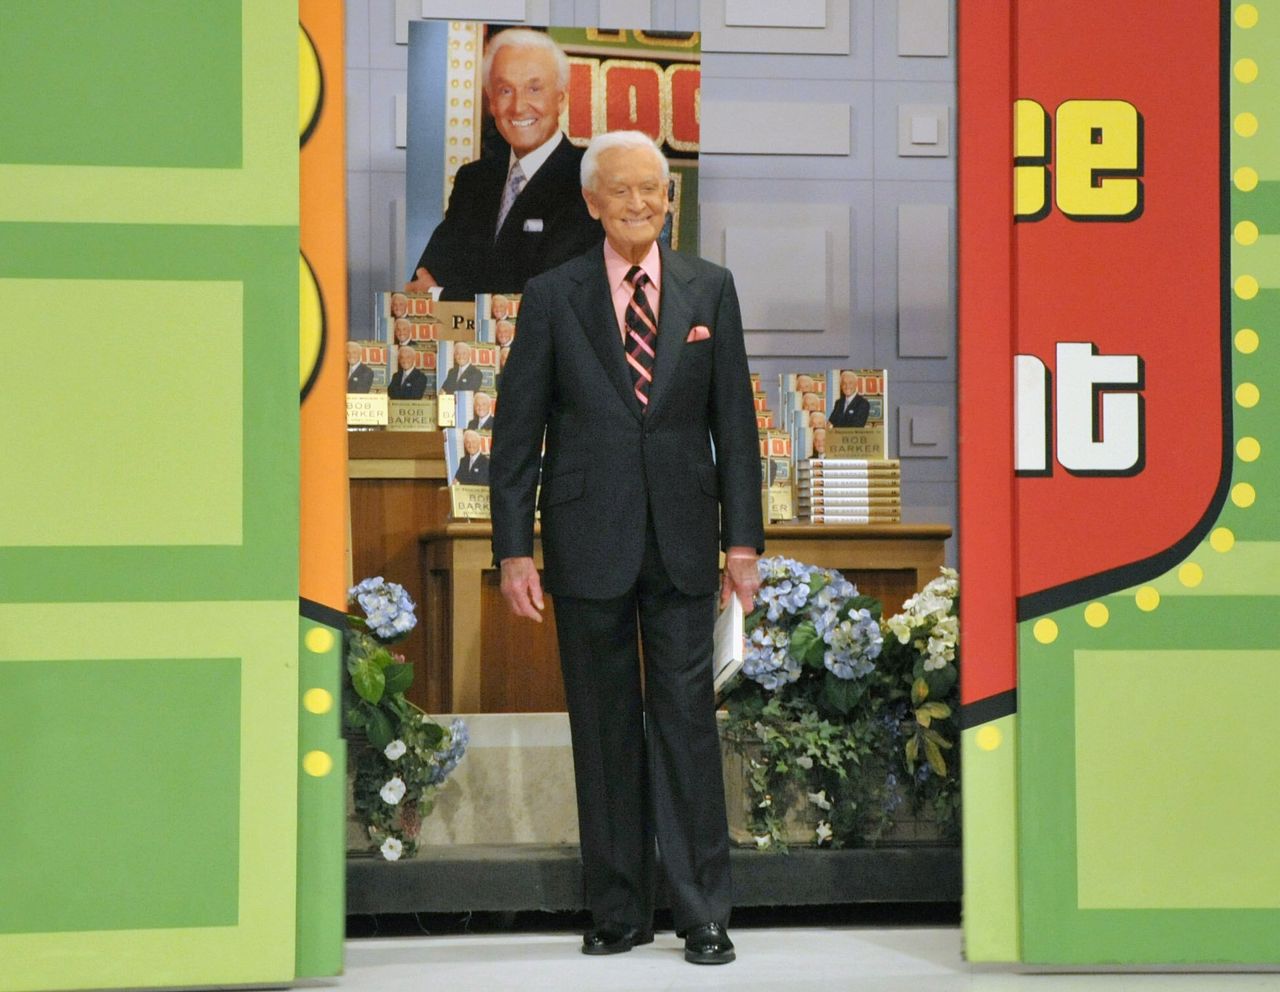 Barker makes a special appearance at the "Price Is Right" studio in Los Angeles on March 25, 2009.